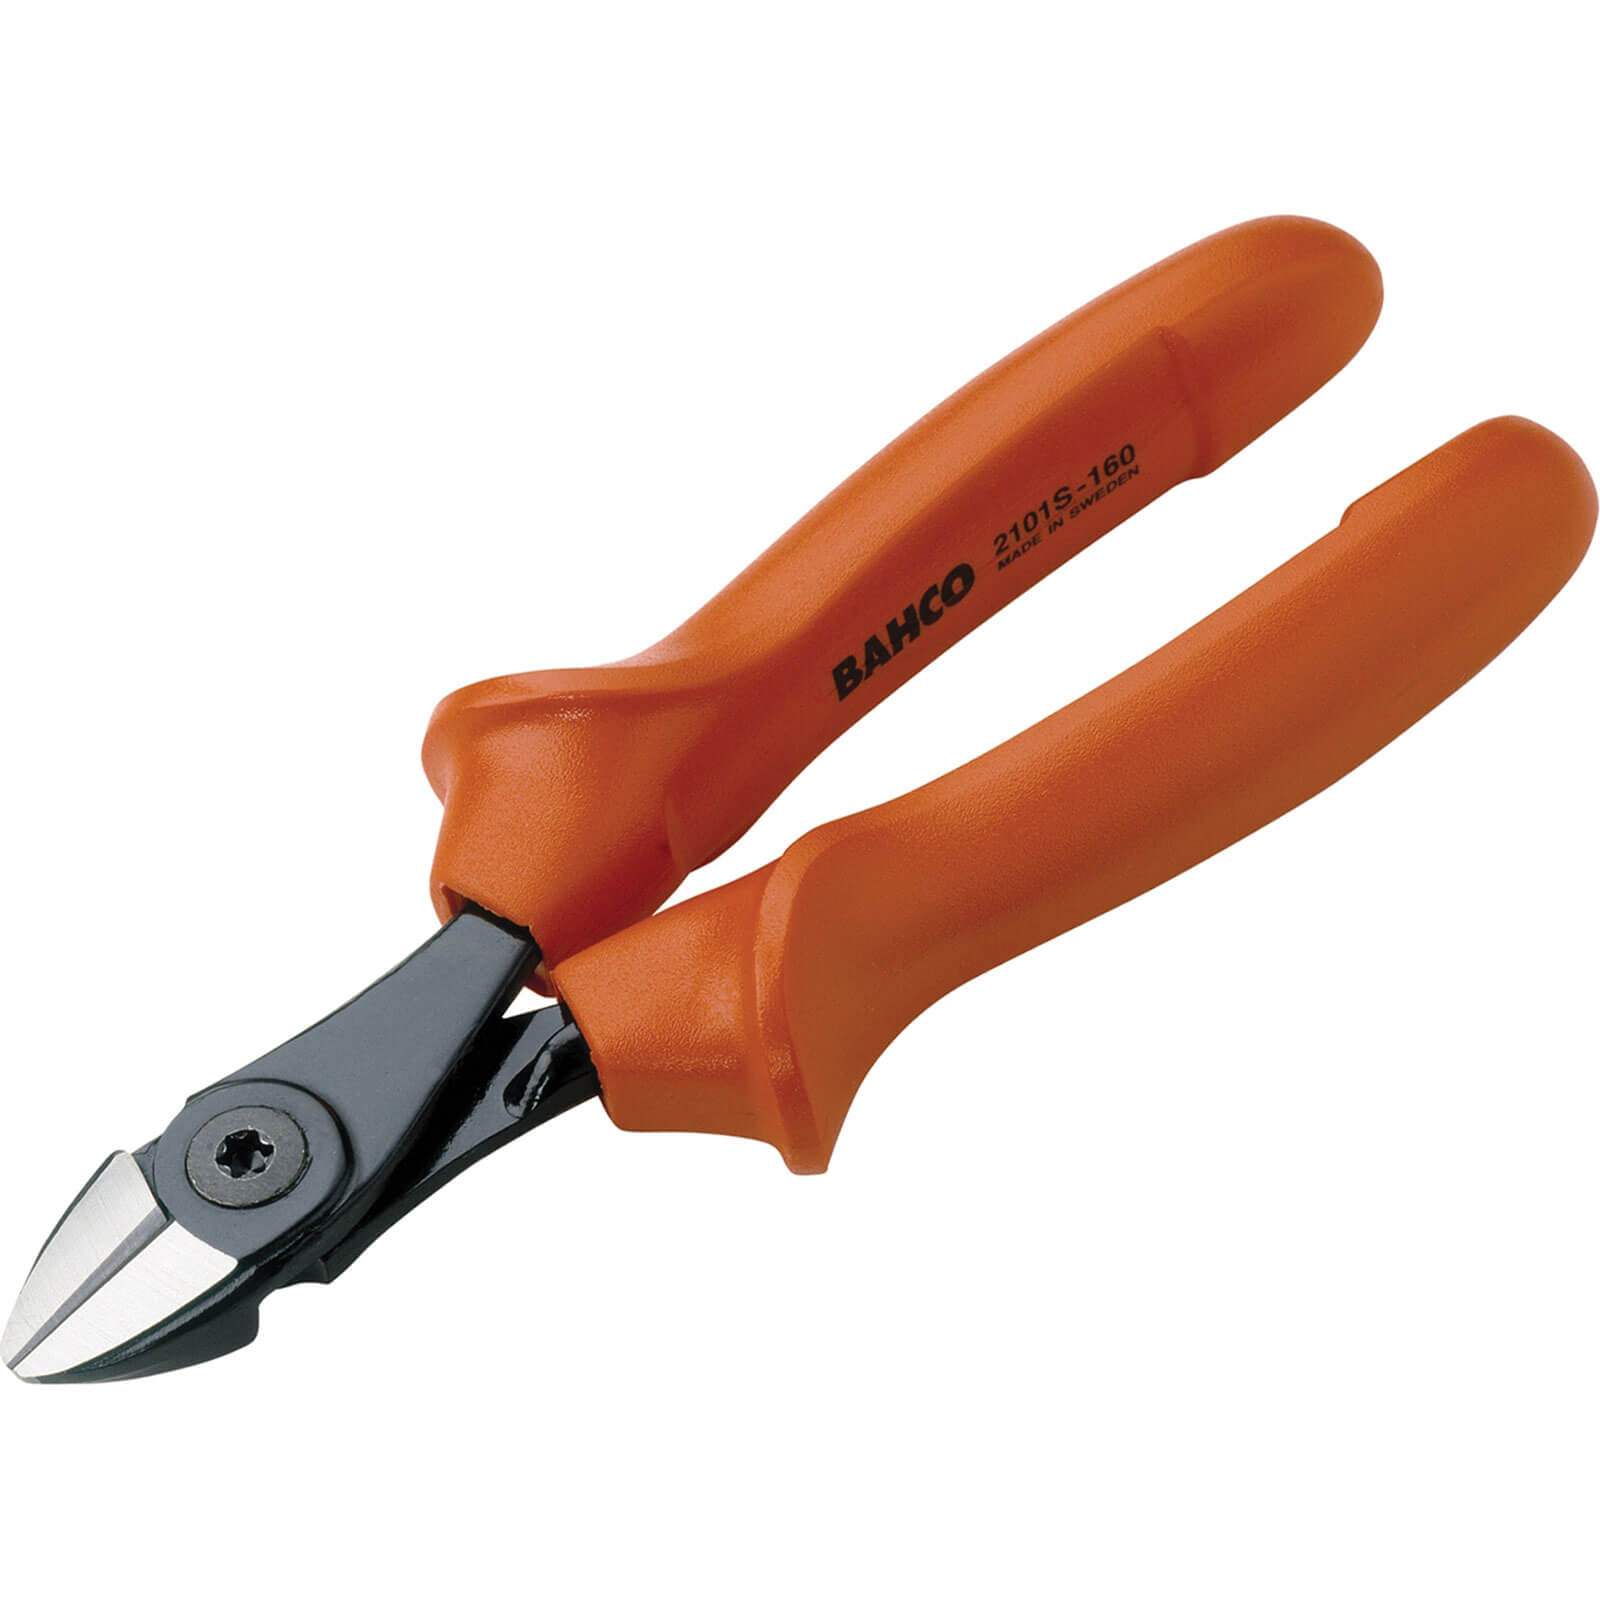 Photo of Bahco 2101s Ergo Insulated Side Cutting Pliers 160mm